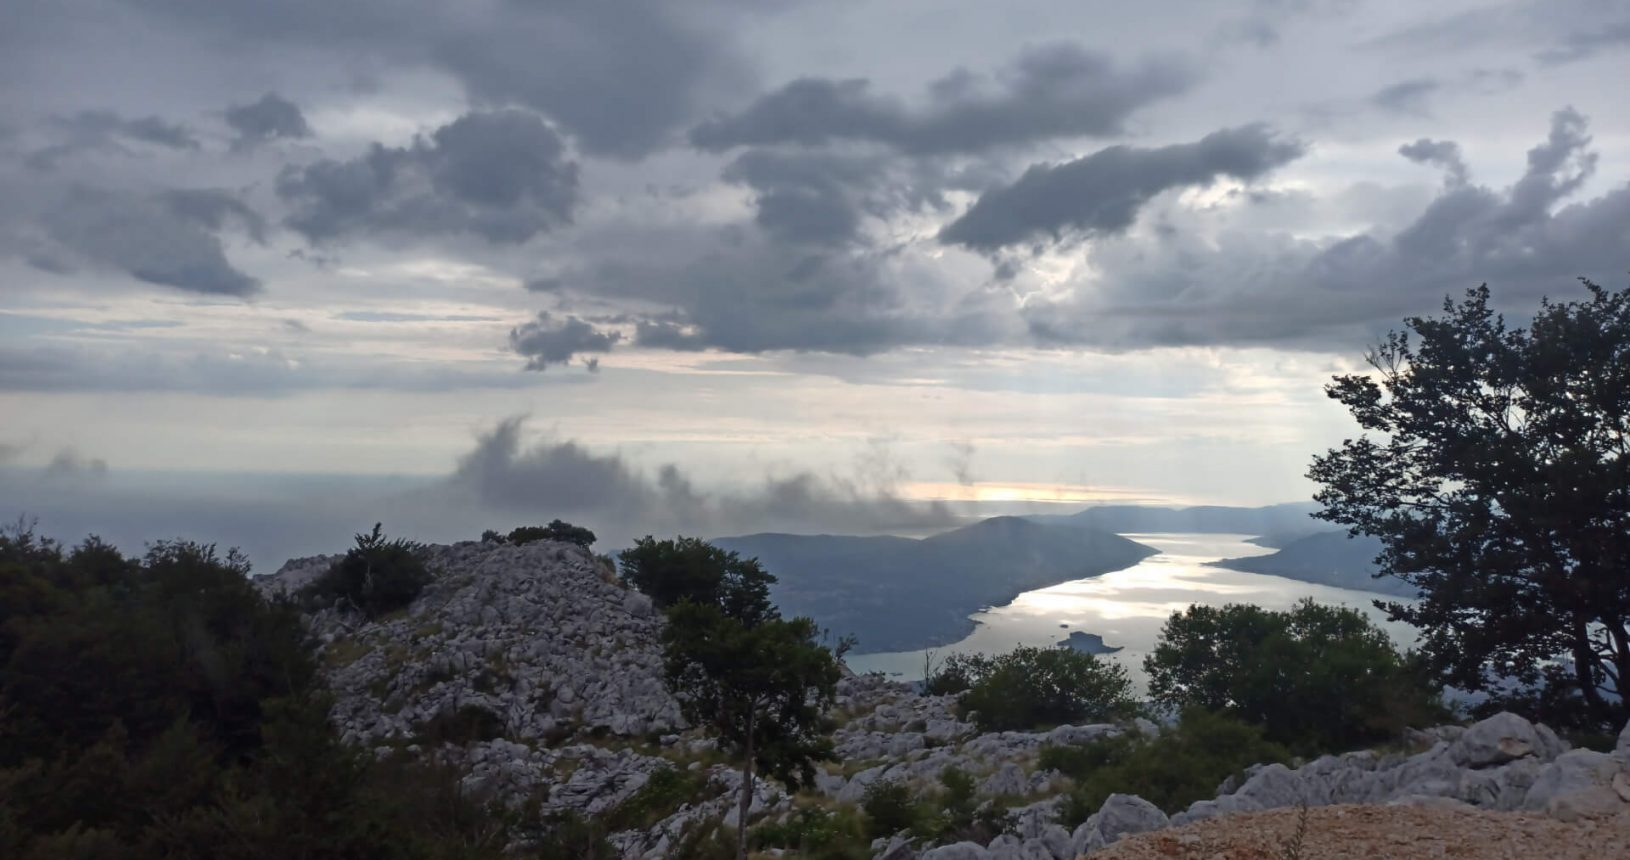 Nature at View point for Kotor and Tivat Bay